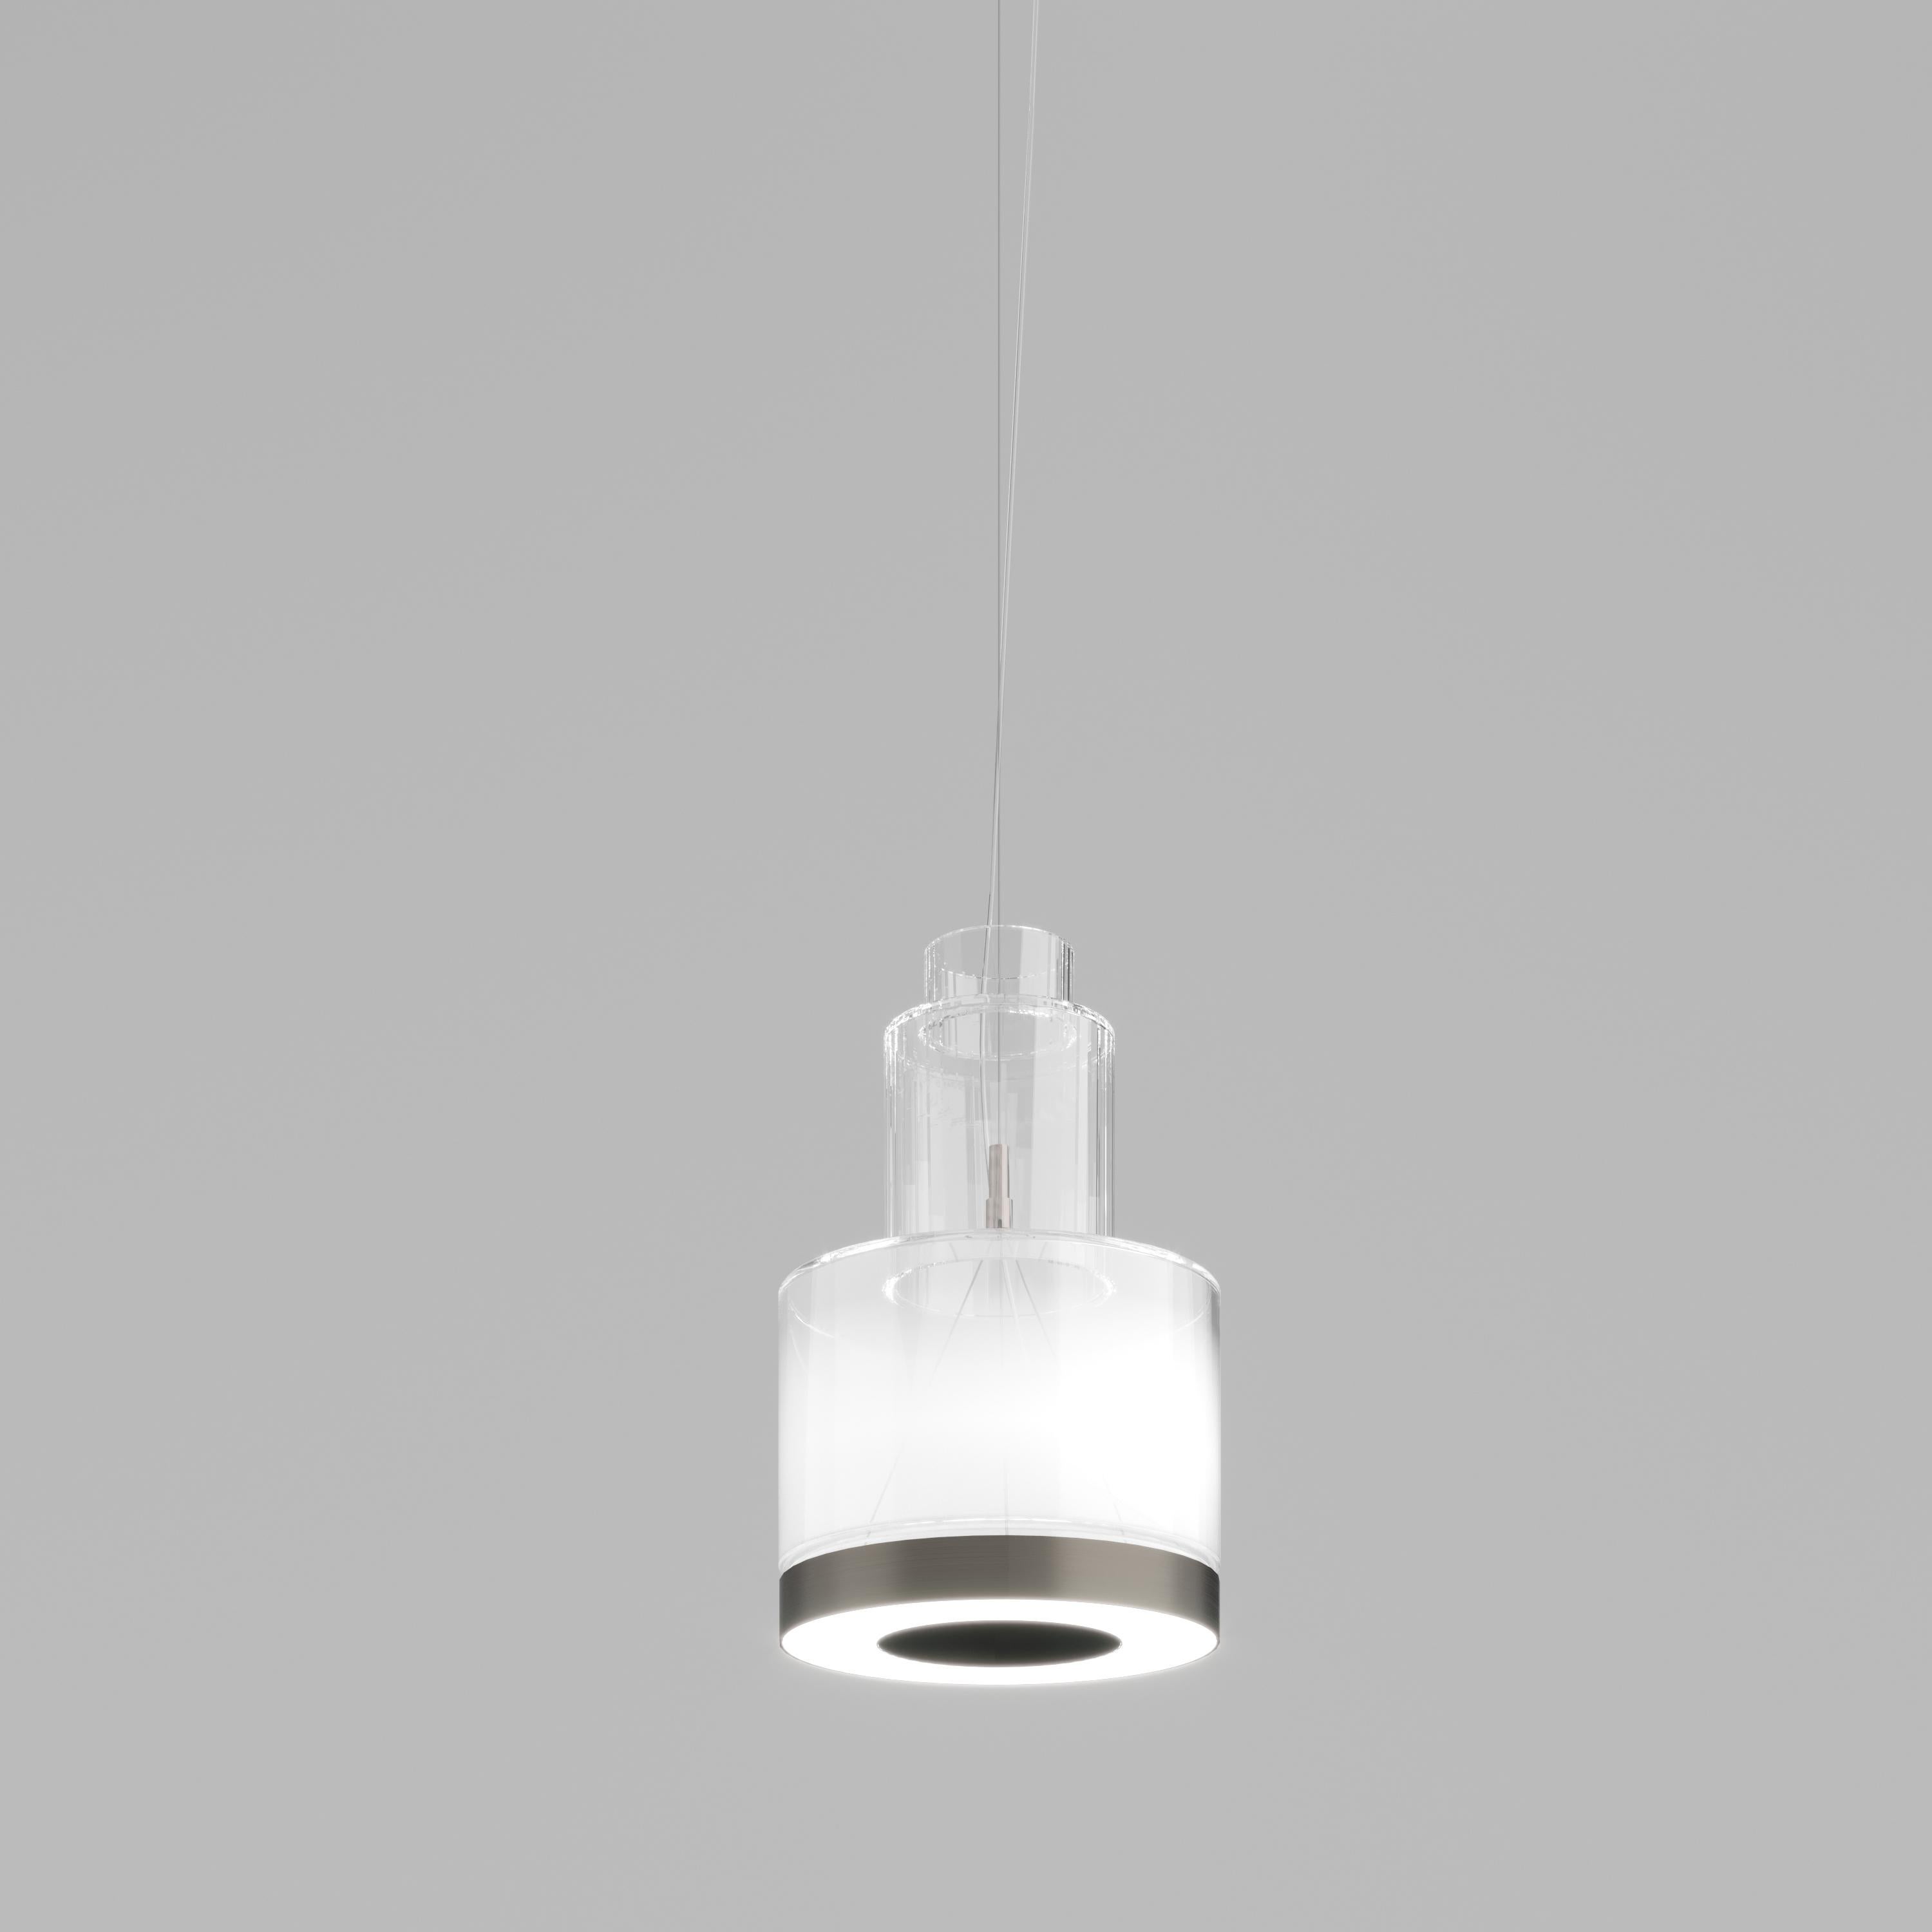 The Medea collection is characterized by geometric and simple shapes. The LED source illuminates the surface and the glass at the same time, bringing towards the ceiling a part of the soft-colour light. Mounted in clusters or individually, they show